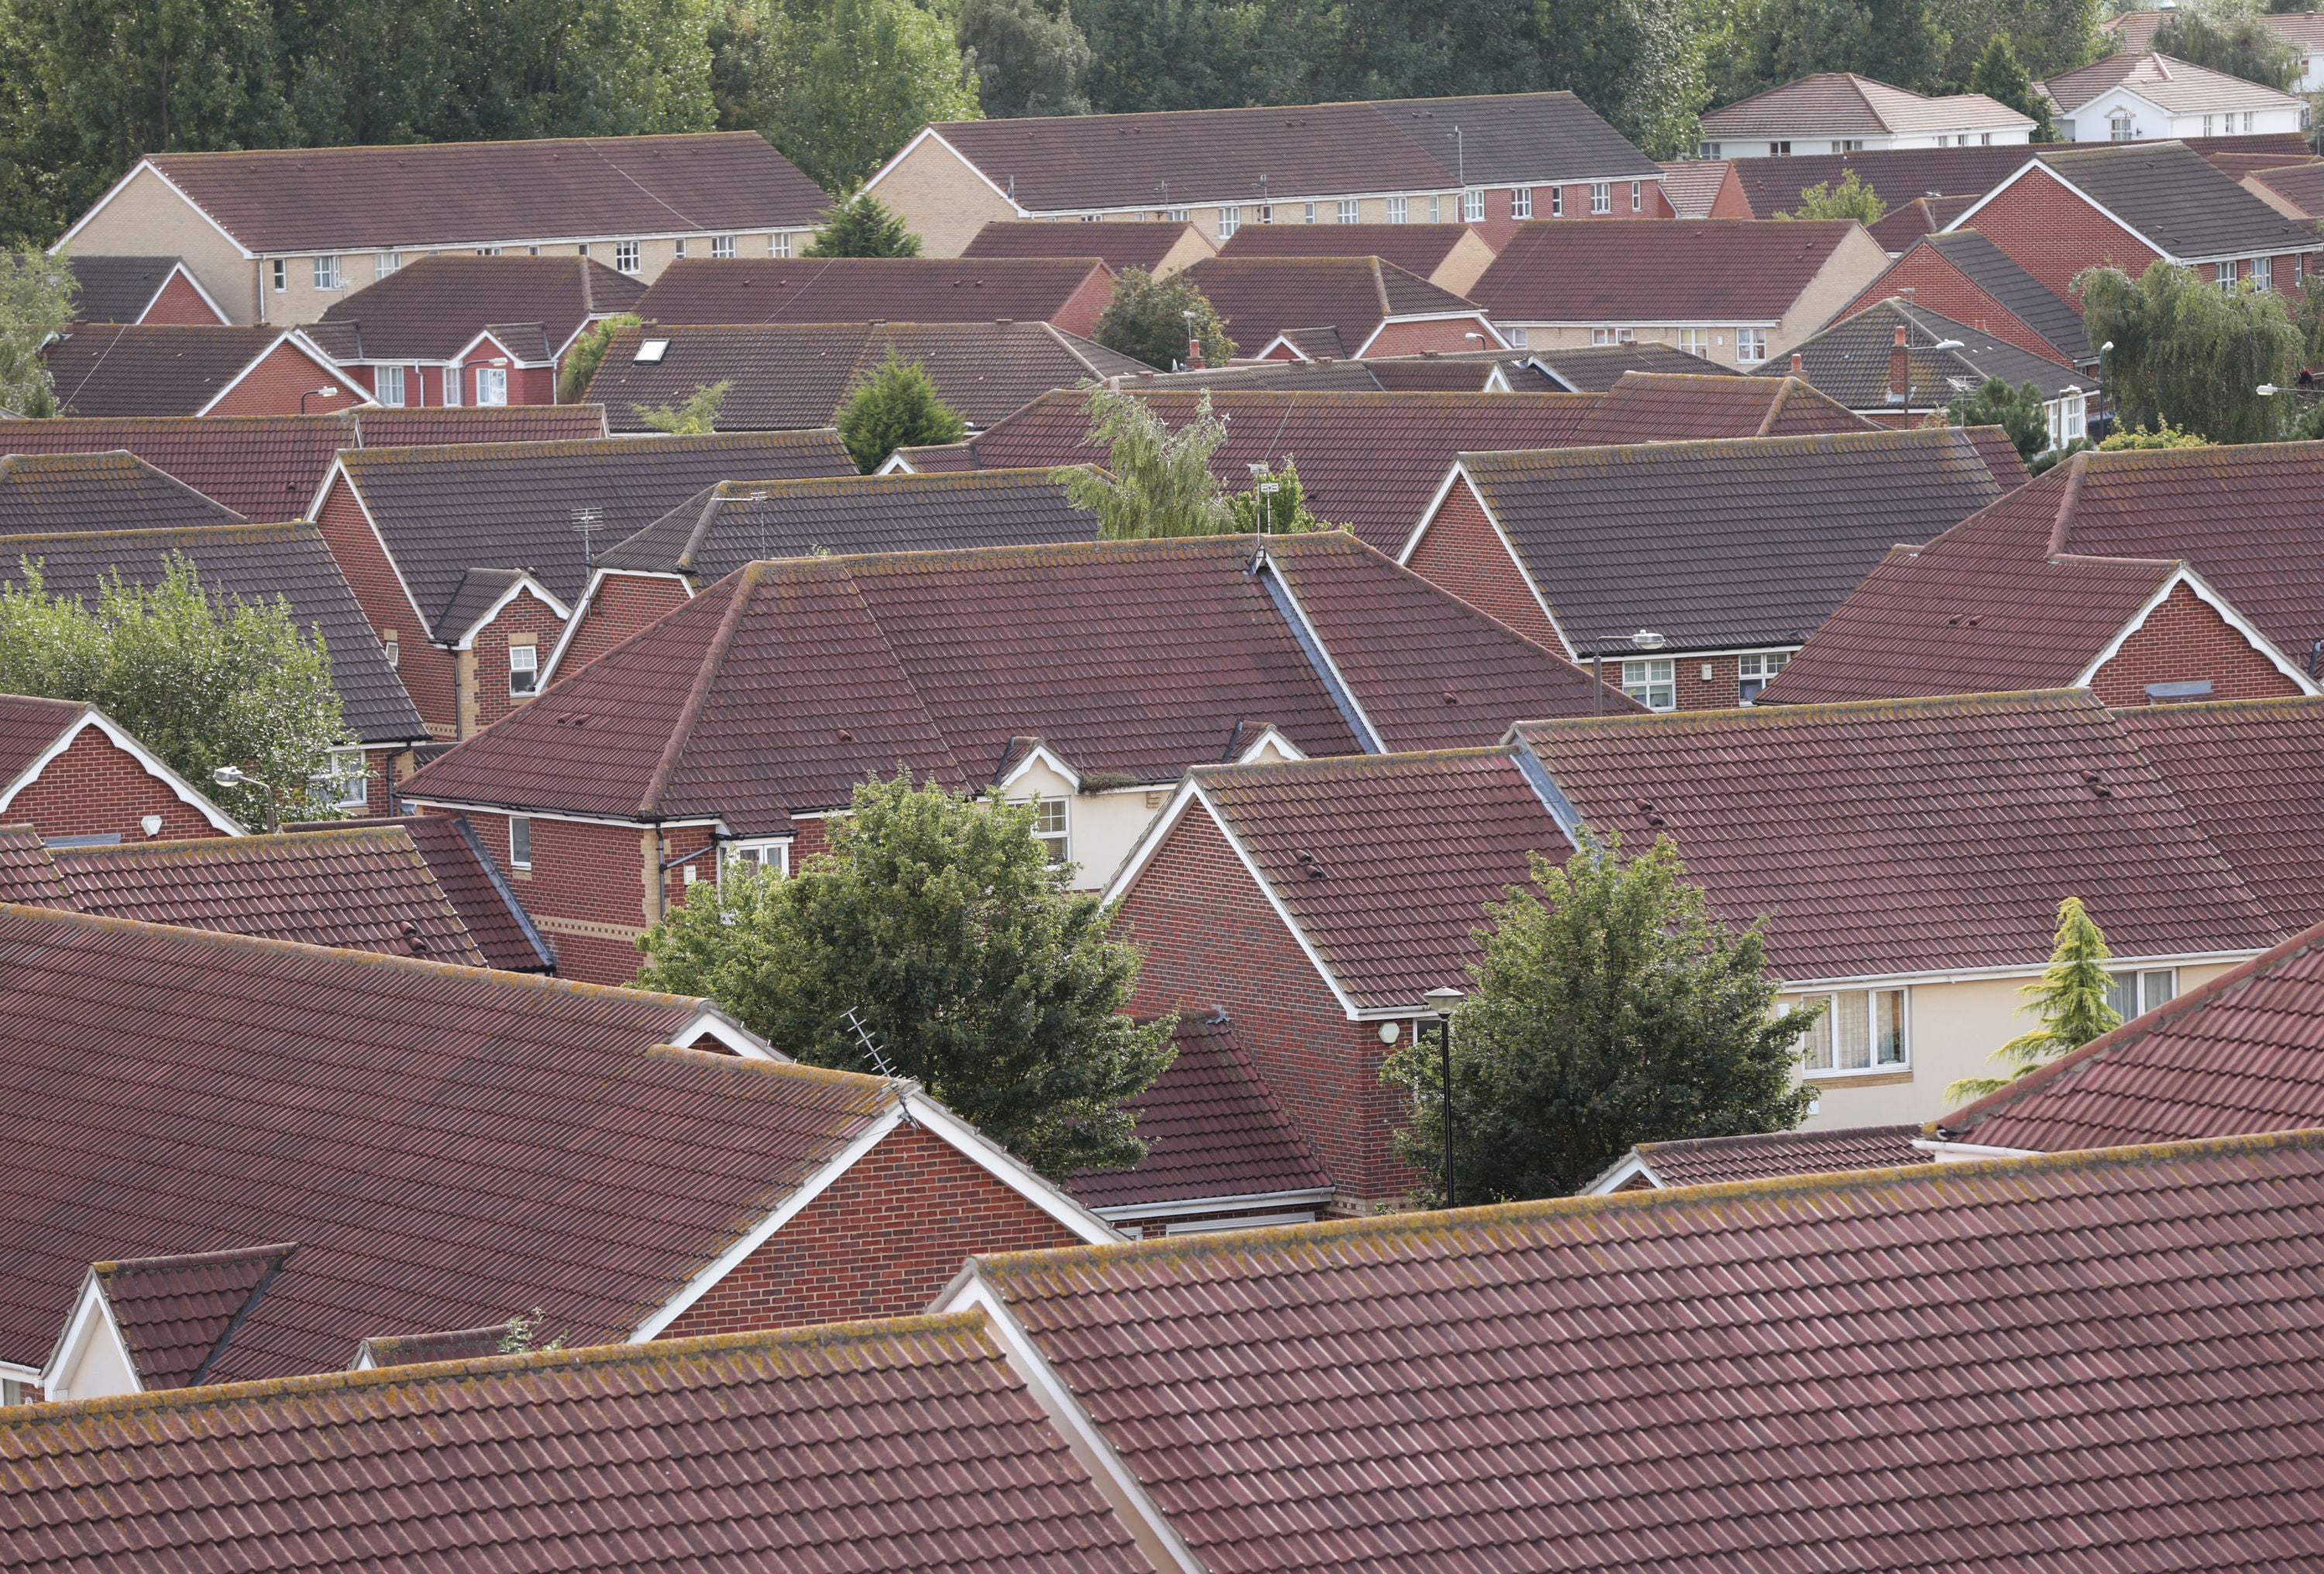 Around one in 10 homes are selling across Britain without being widely marketed, according to Hamptons (Yui Mok/PA)